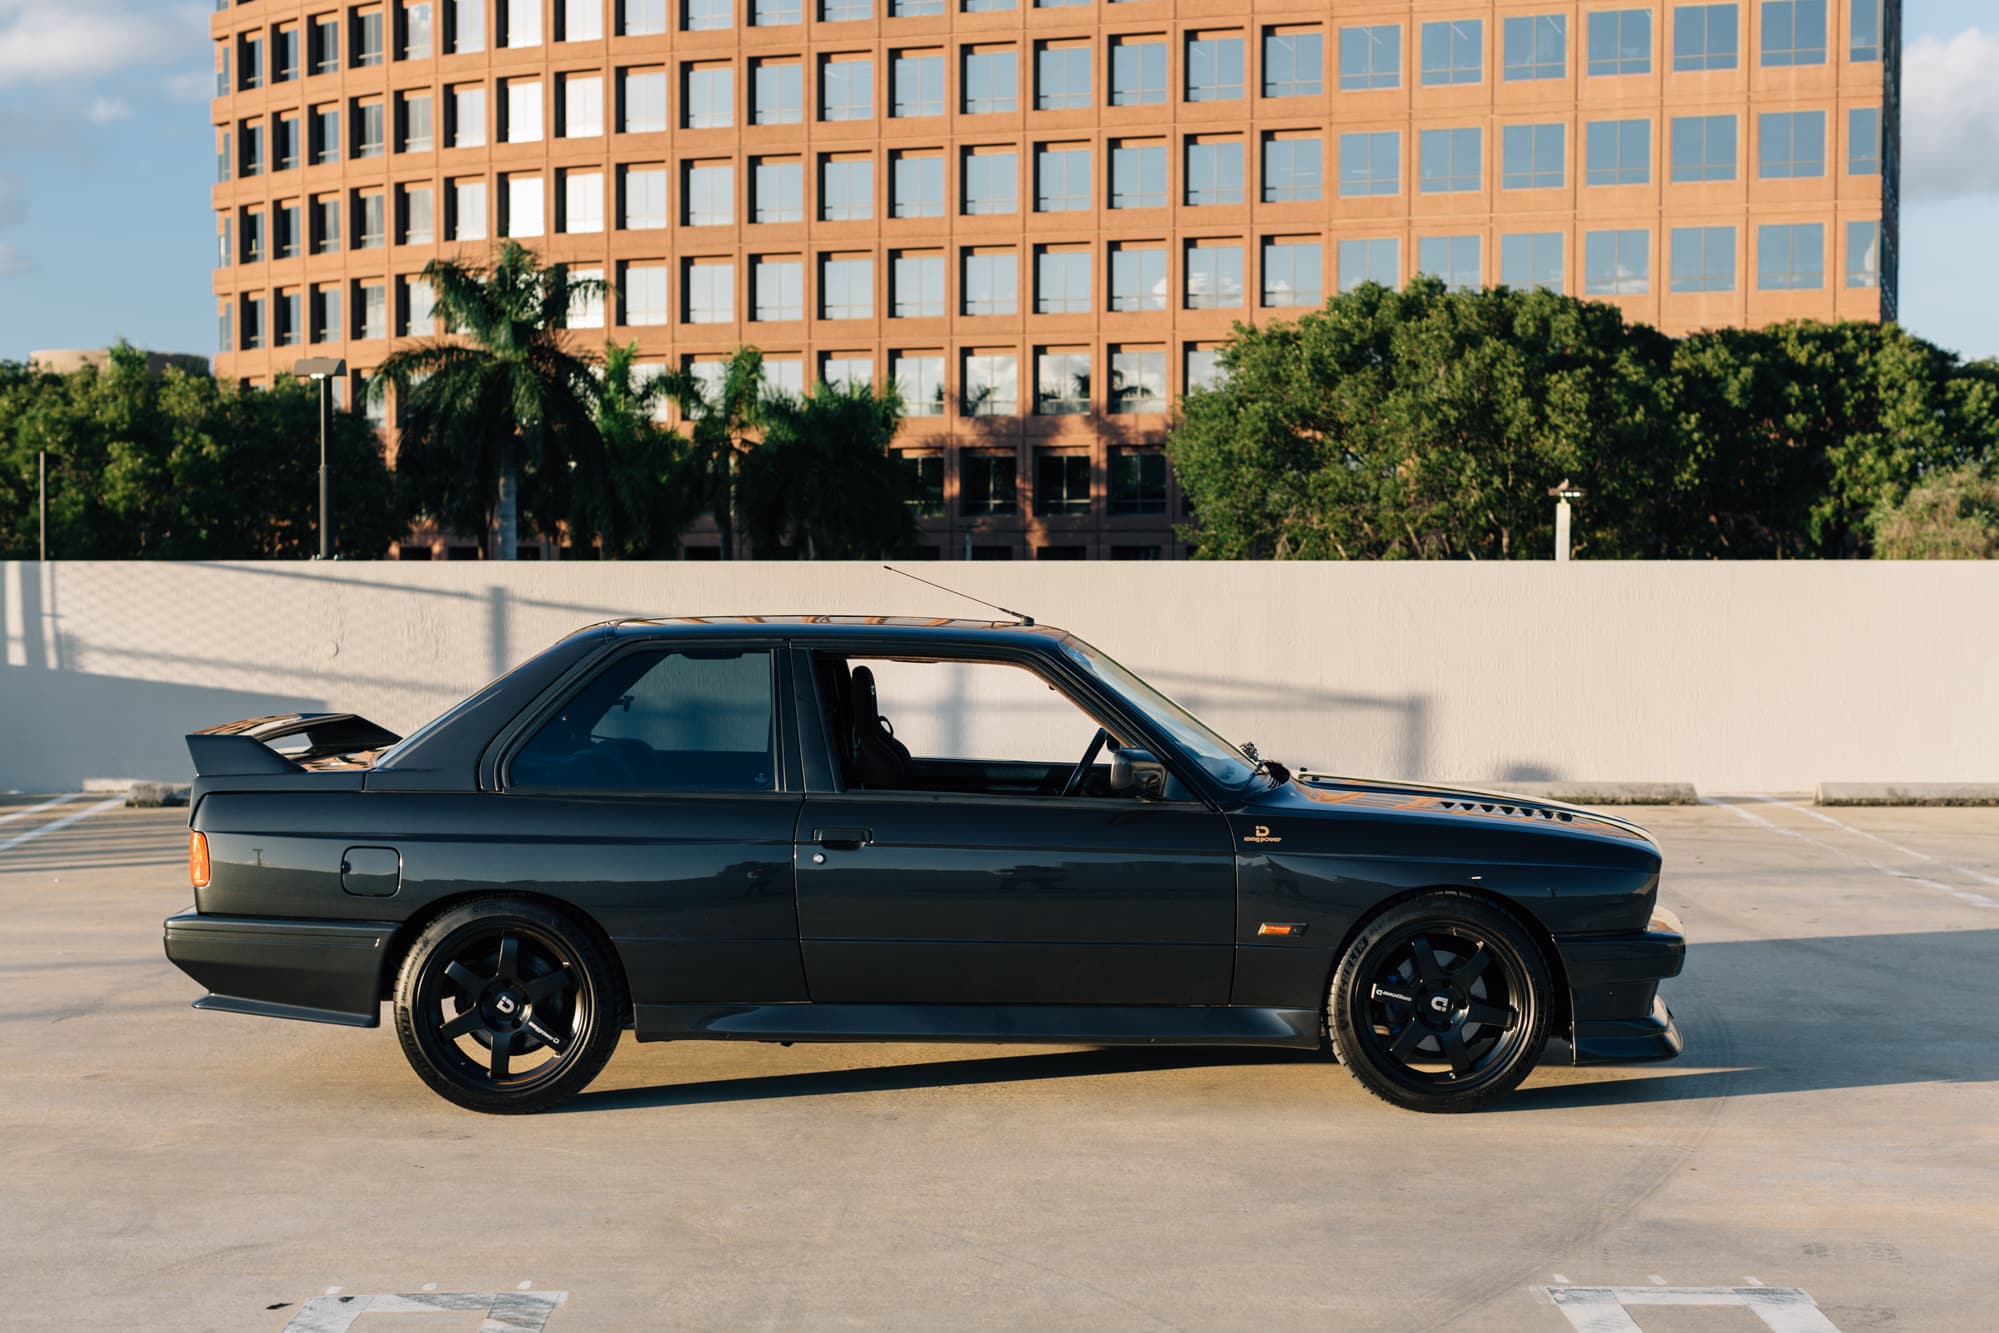 1989 BMW M3 S2+A (E30) by Iding Power | Blue printed S14 | Iding TE37s | Beautifully Preserved | Incredibly well-documented build & maintenance history